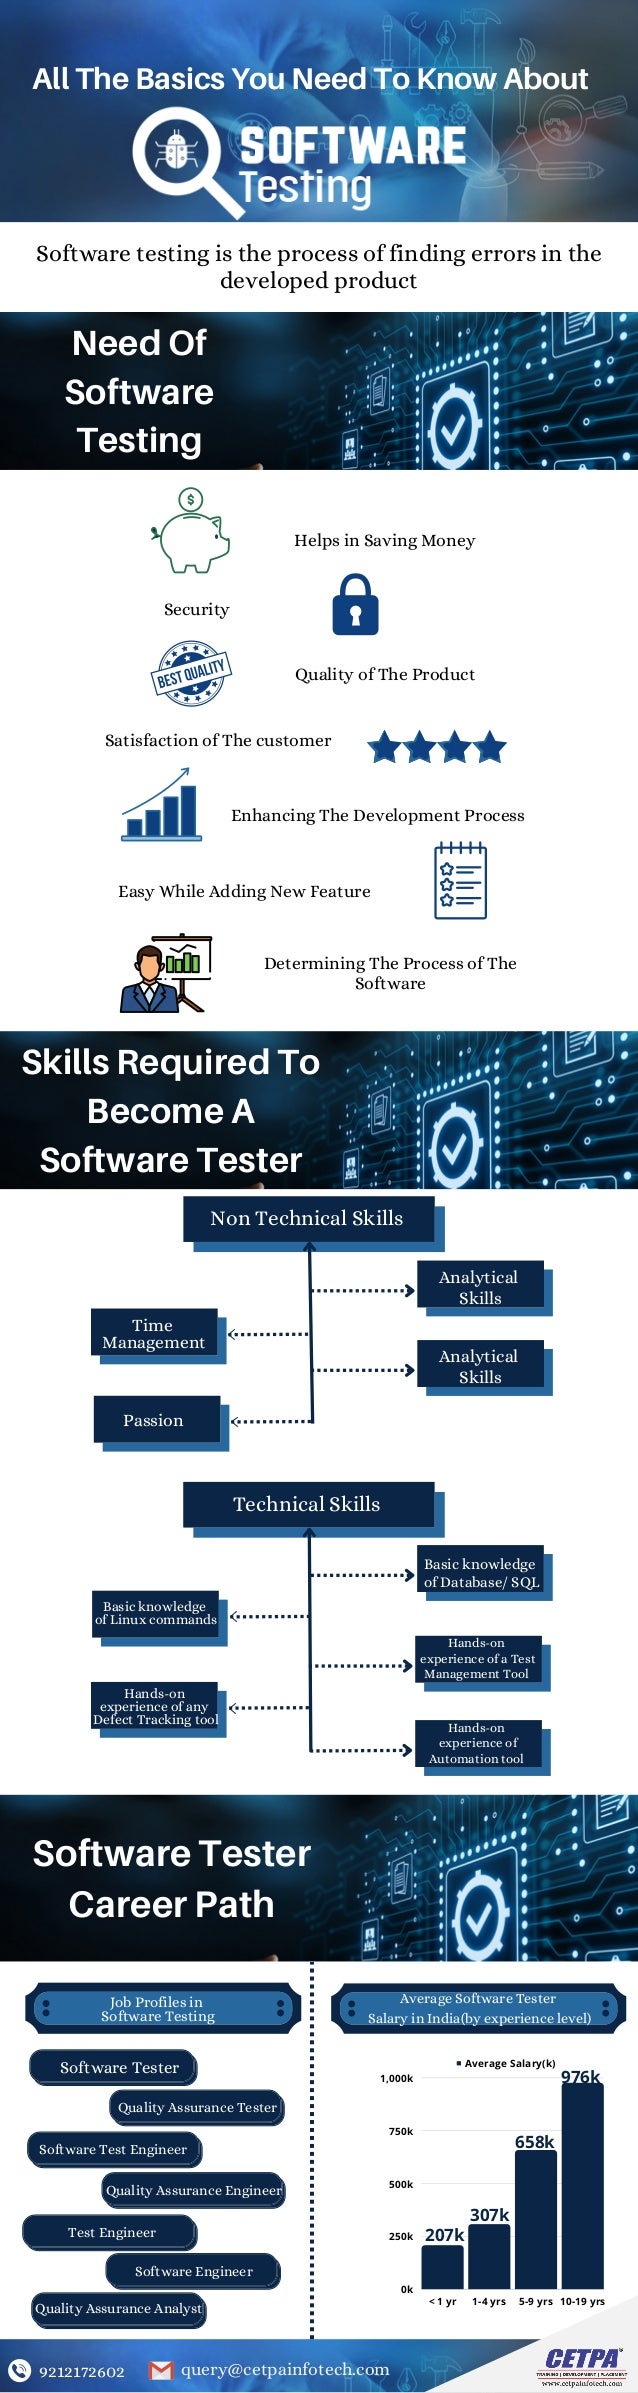 Average Salary(k)
< 1 yr 1-4 yrs 5-9 yrs 10-19 yrs
1,000k
750k
500k
250k
0k
All The Basics You Need To Know About
Software testing is the process of finding errors in the
developed product
Need Of
Software
Testing
Helps in Saving Money
Security
Quality of The Product
Satisfaction of The customer
Enhancing The Development Process
Easy While Adding New Feature
Determining The Process of The
Software
Skills Required To
Become A
Software Tester
Non Technical Skills
Analytical
Skills
Analytical
Skills
Time
Management
Passion
Technical Skills
Basic knowledge
of Database/ SQL
Basic knowledge
of Linux commands
Hands-on
experience of a Test
Management Tool
Hands-on
experience of any
Defect Tracking tool
Hands-on
experience of
Automation tool
Software Tester
Career Path
Software Tester
Quality Assurance Tester
Software Test Engineer
Quality Assurance Engineer
Test Engineer
Software Engineer
Quality Assurance Analyst
Job Profiles in
Software Testing
Average Software Tester
Salary in India(by experience level)
207k
307k
658k
976k
9212172602 query@cetpainfotech.com
 